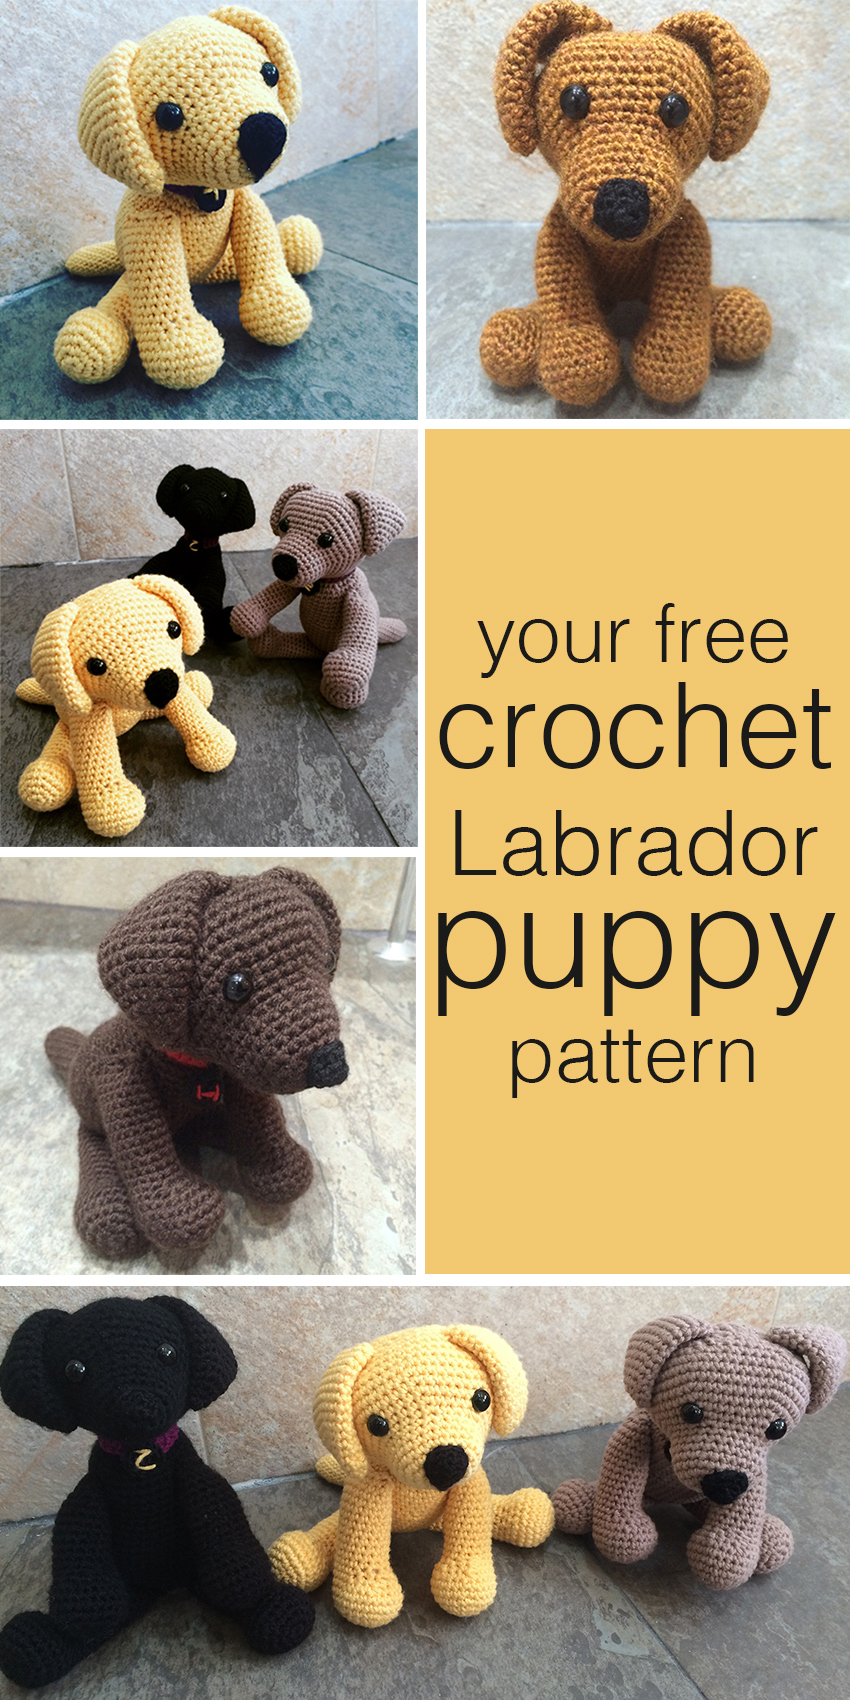 Simple Crochet Doll Pattern Crochet Labrador How To Make Your Own Toy Dog The Labrador Site